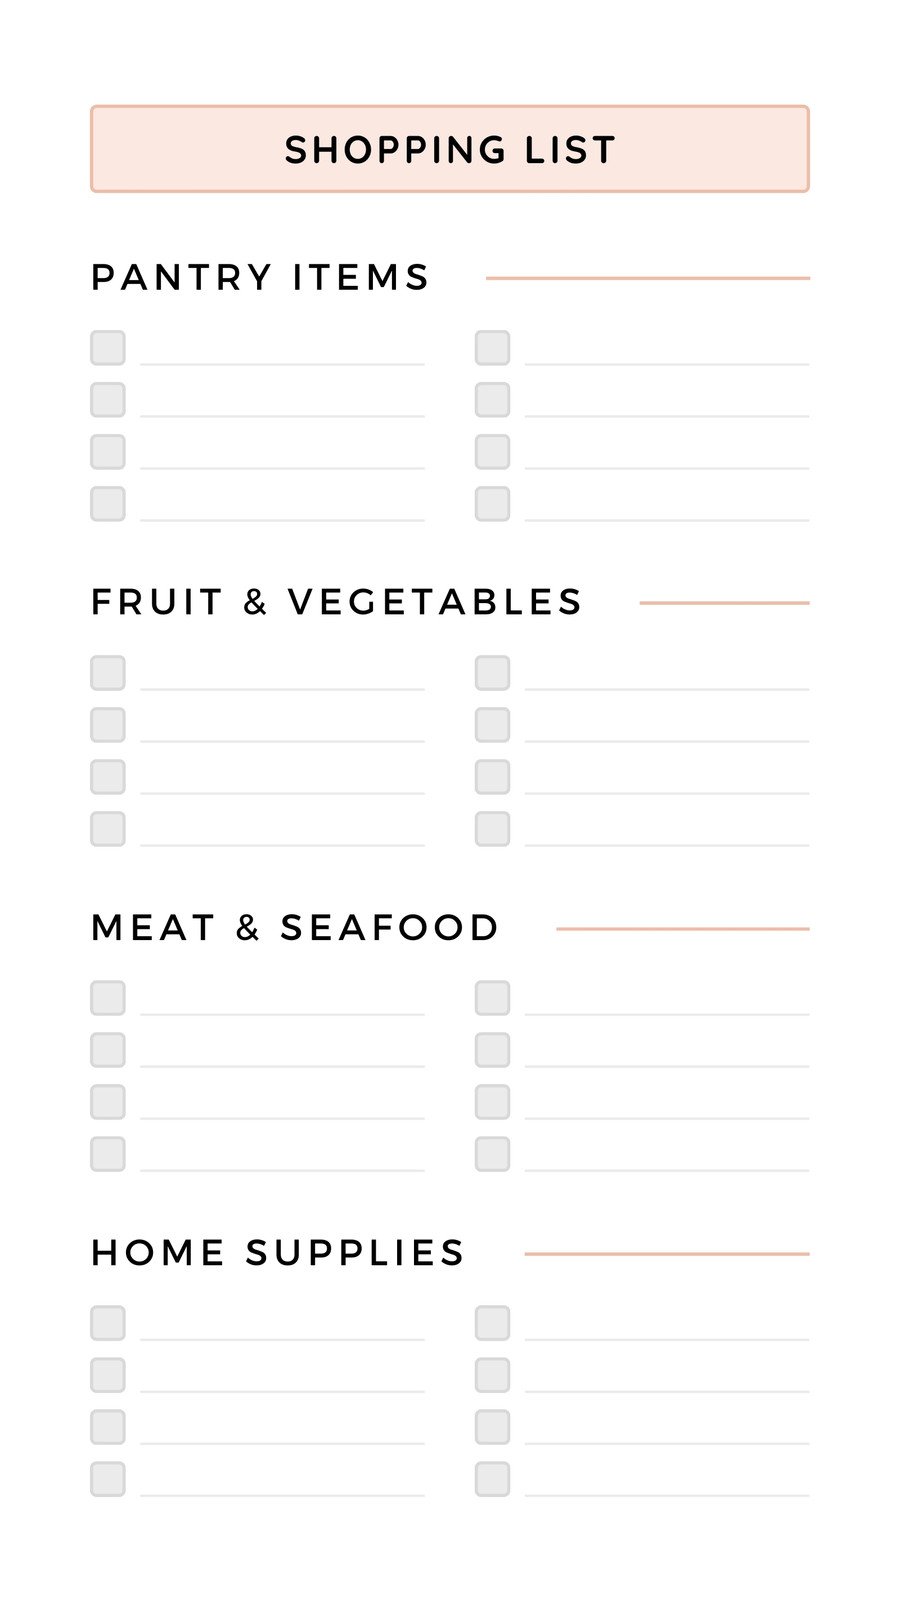 Free printable and customizable grocery list templates